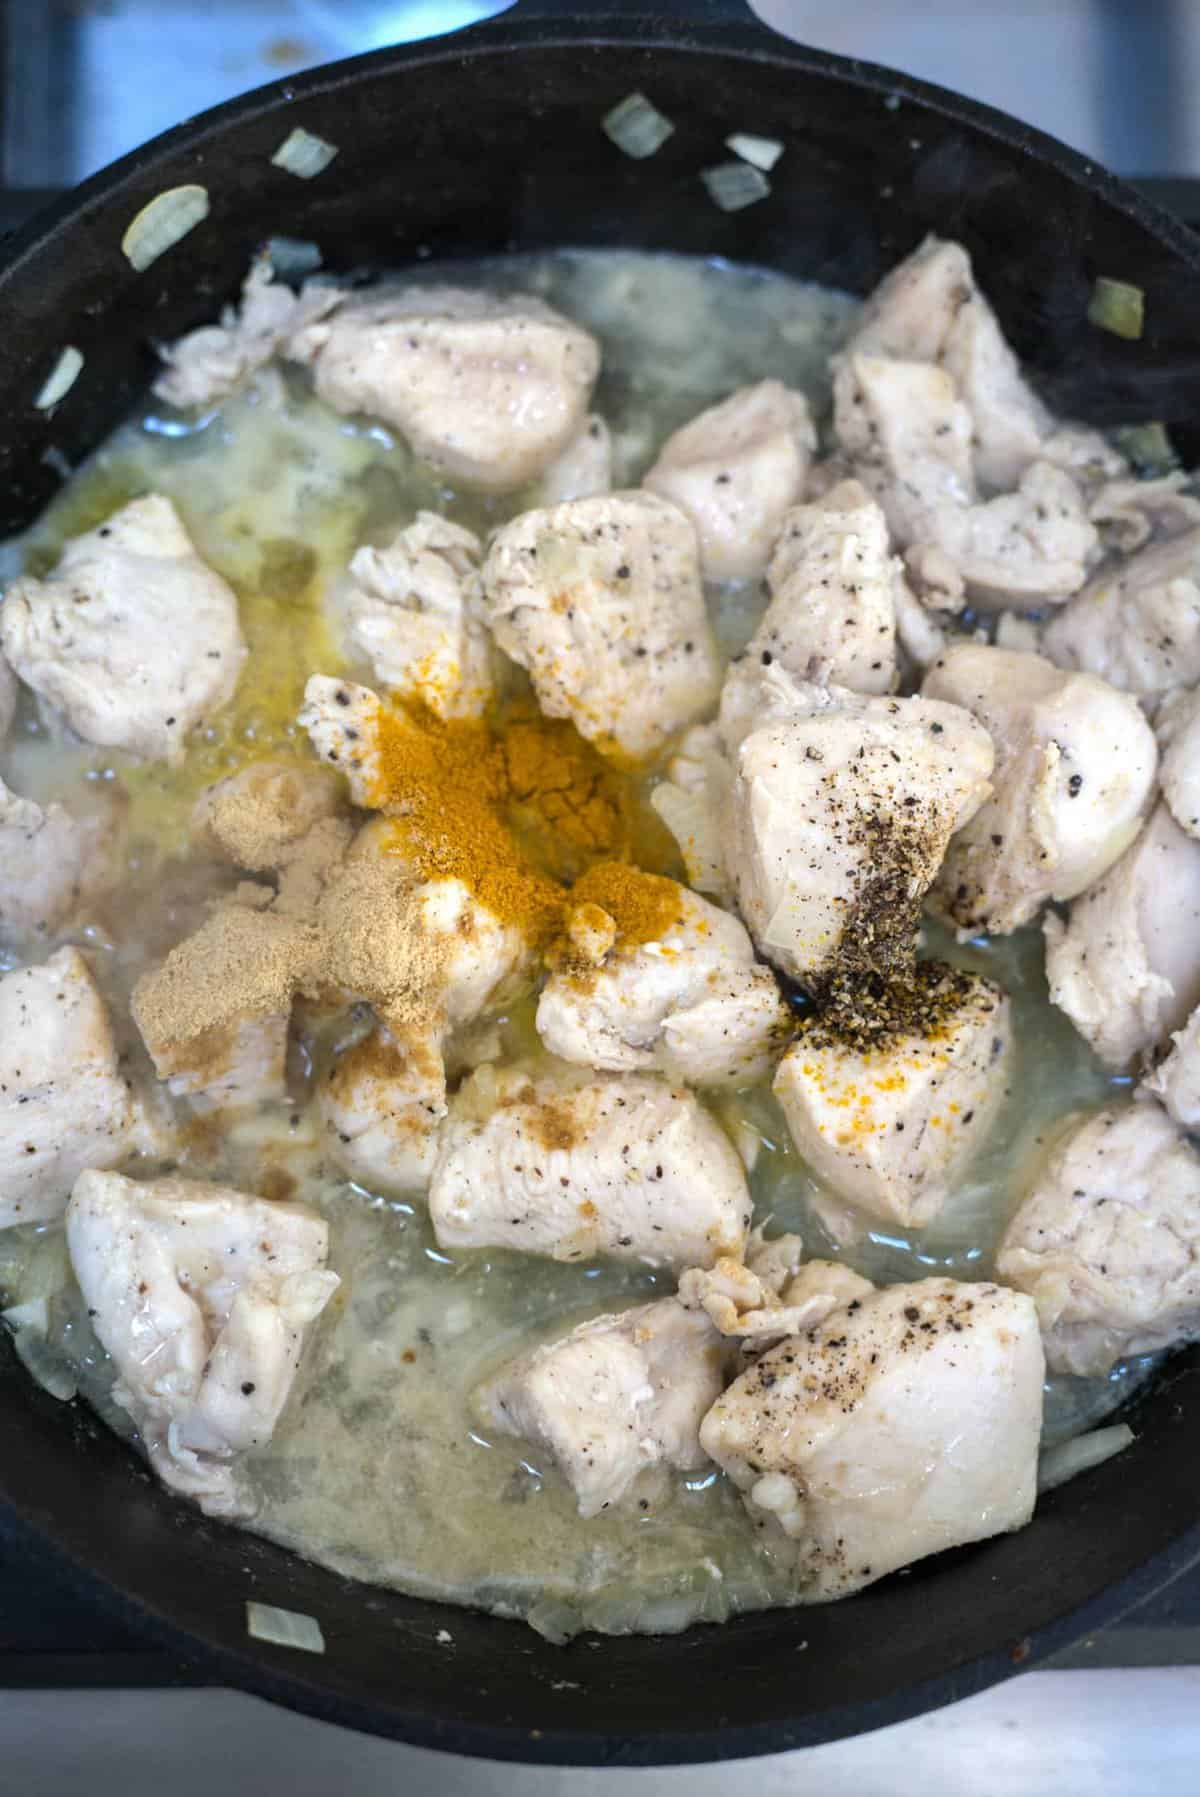 lime and spices to chicken